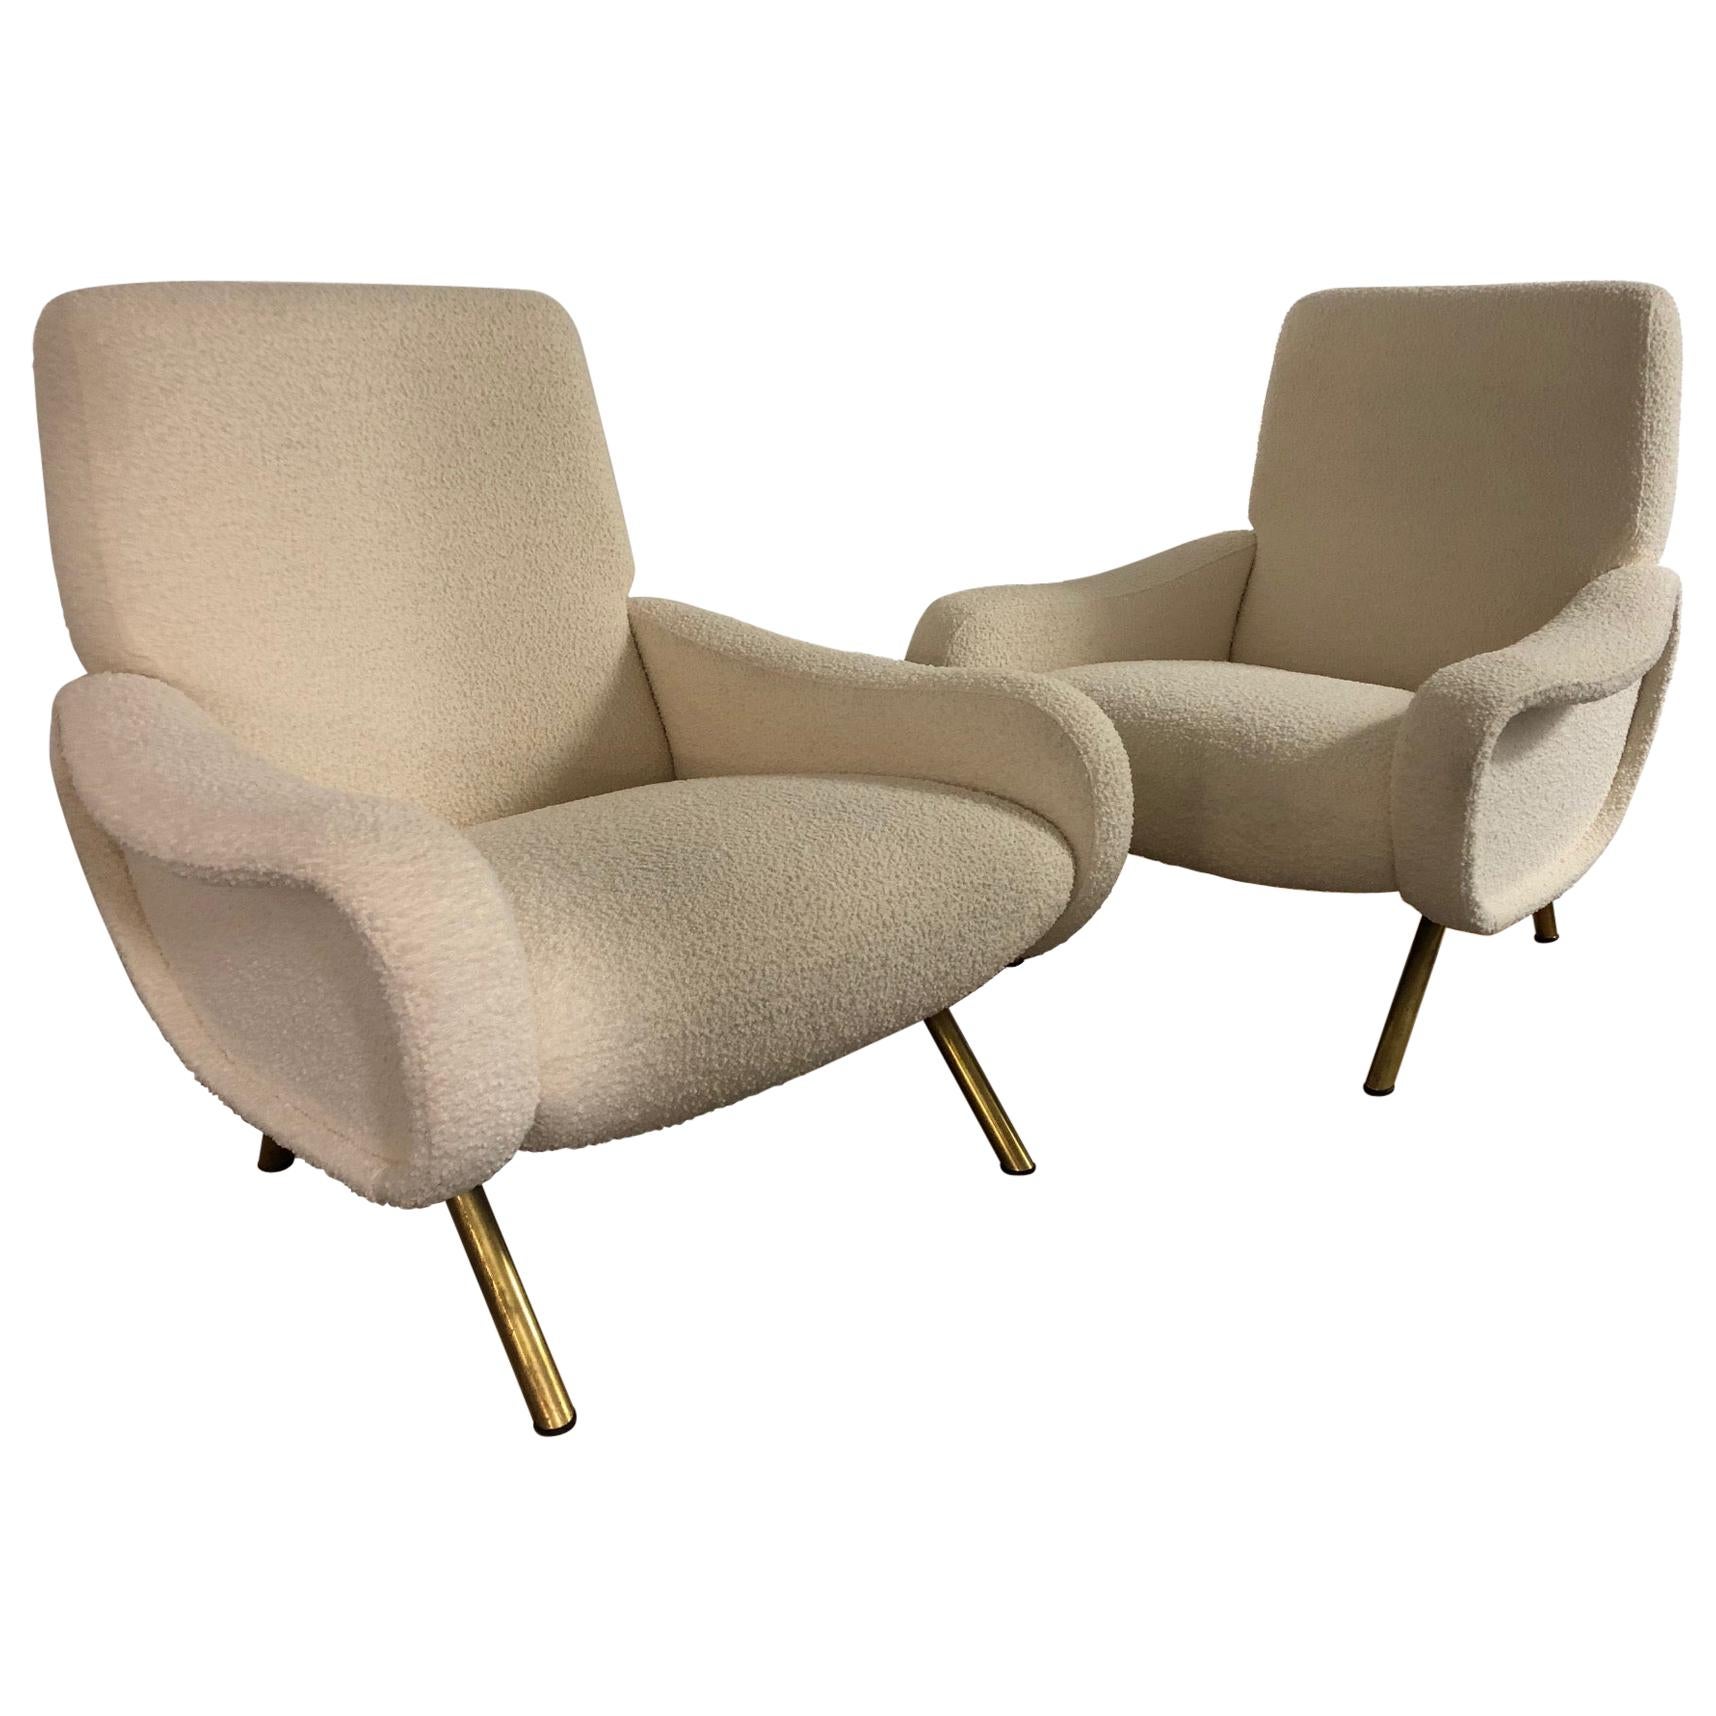 Pair of "Lady" Armchairs by Marco Zanuso for Arflex, Italy, 1950s